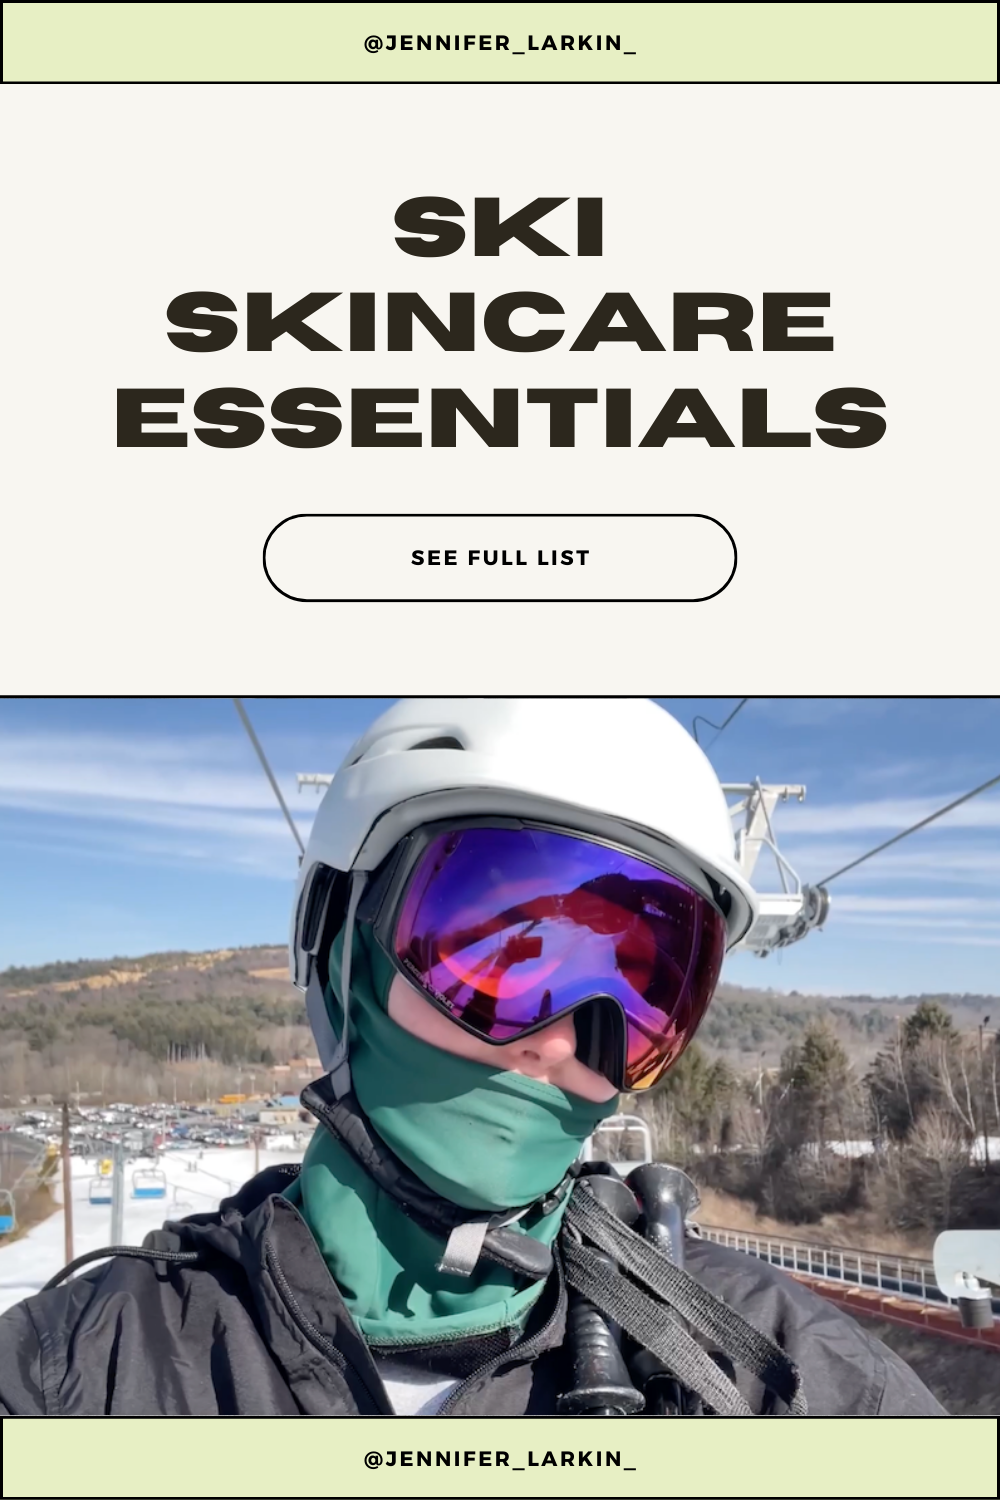 Conquer the slopes with hydrated & protected skin! 🎿❄️ Sharing my skiing skincare essentials to keep you glowing on and off the mountain. From moisturizers to nasal spray, these products are a must for any ski adventure.